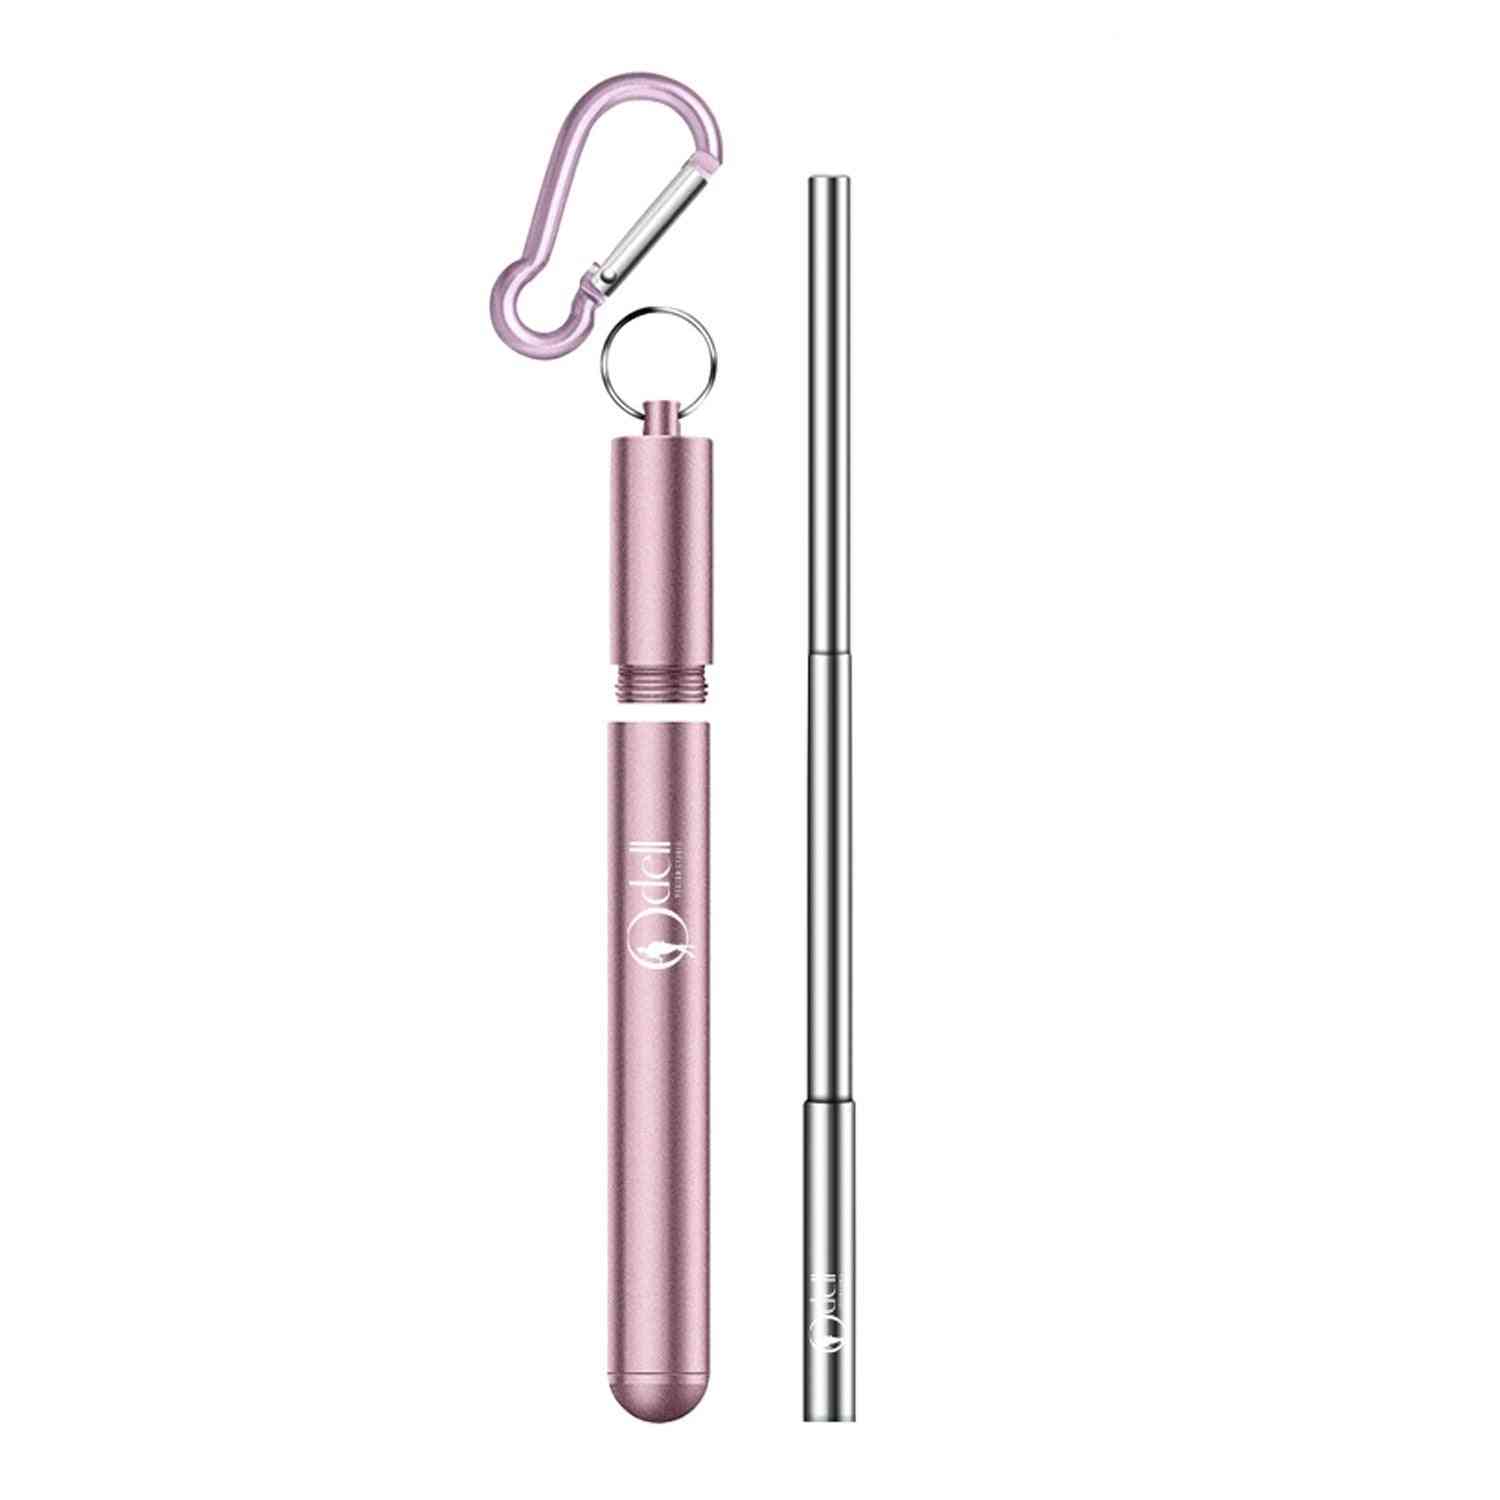 Collapsible, Reusable Stainless Steel Straw